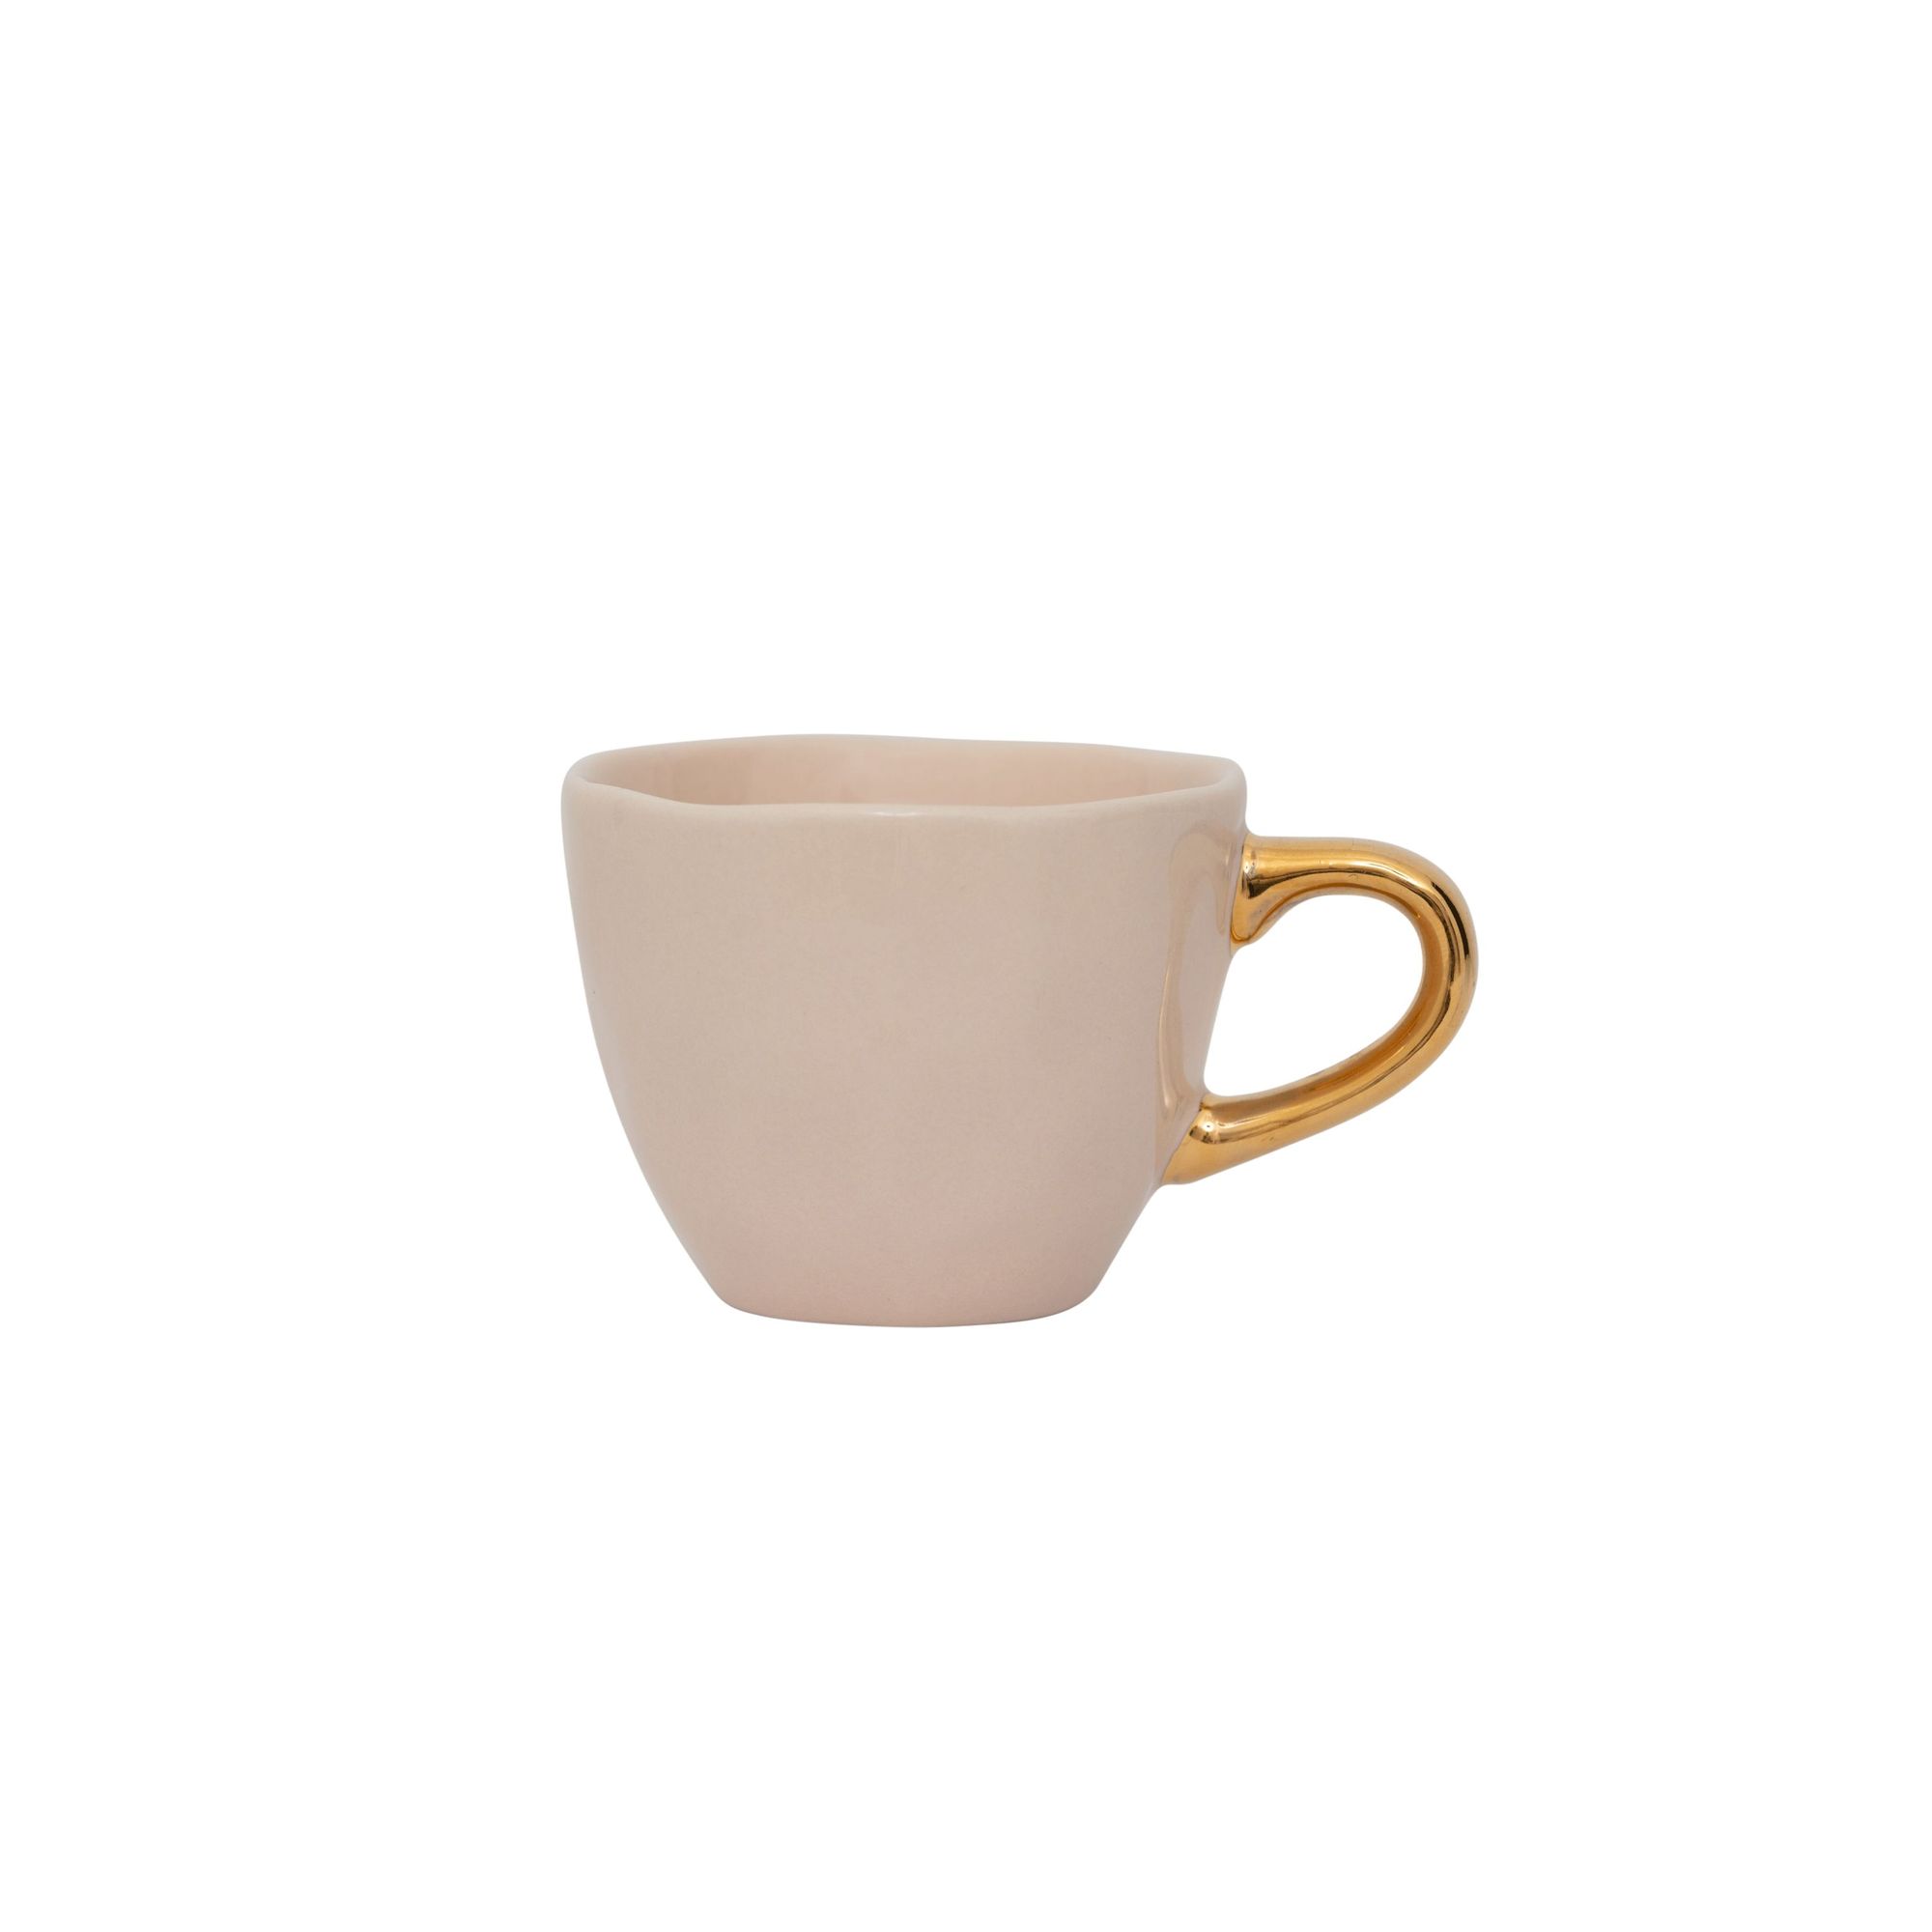 Unc Good Morning Cup Espresso Old Pink Gift